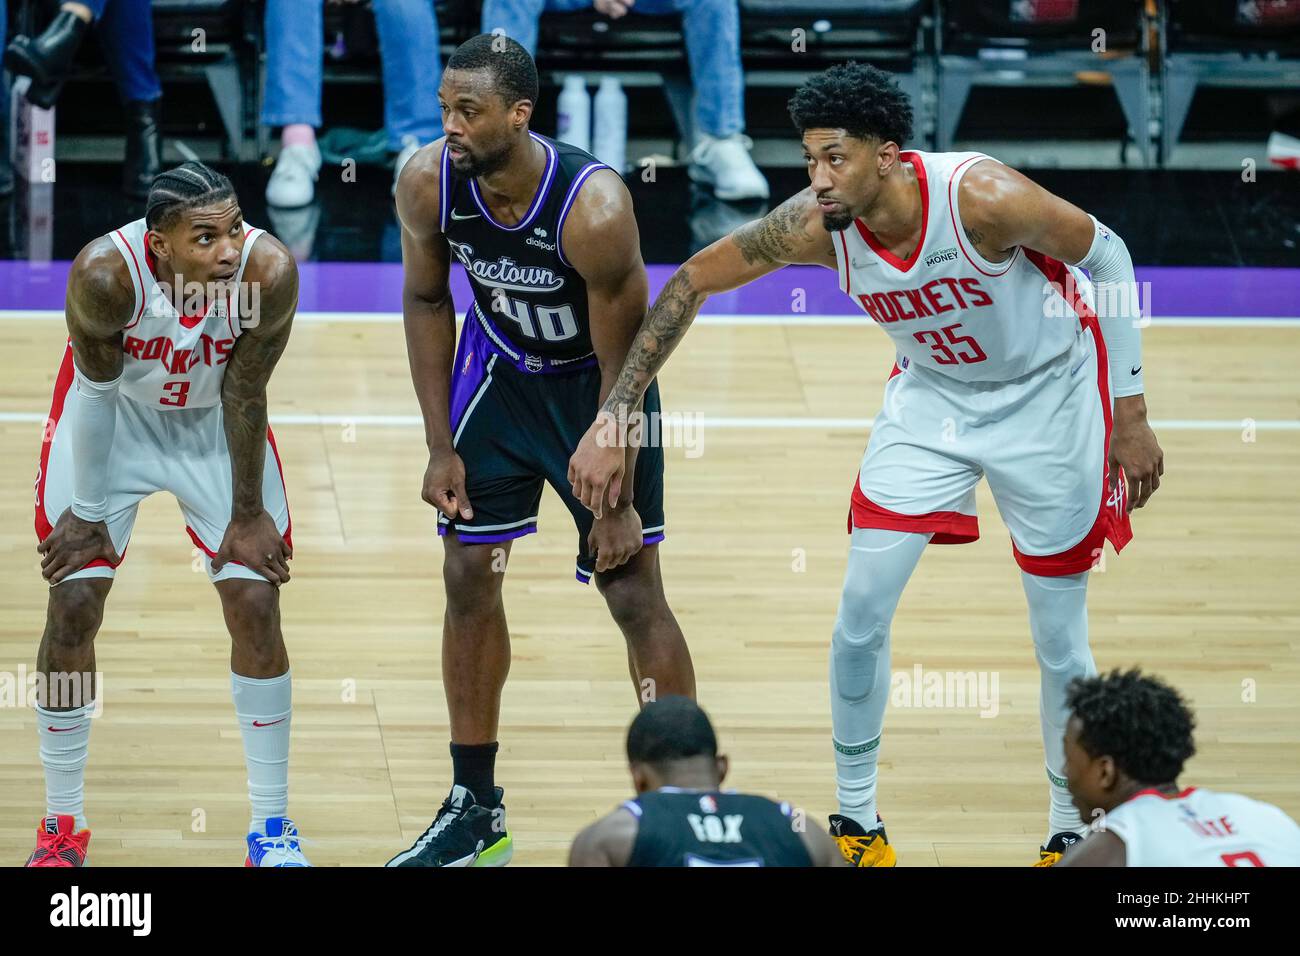 Sacramento Kings forward Harrison Barnes (40) stands between Houston Rockets players Kevin Porter Jr (3) and Christian Wood (35) at the NBA game betwe Stock Photo